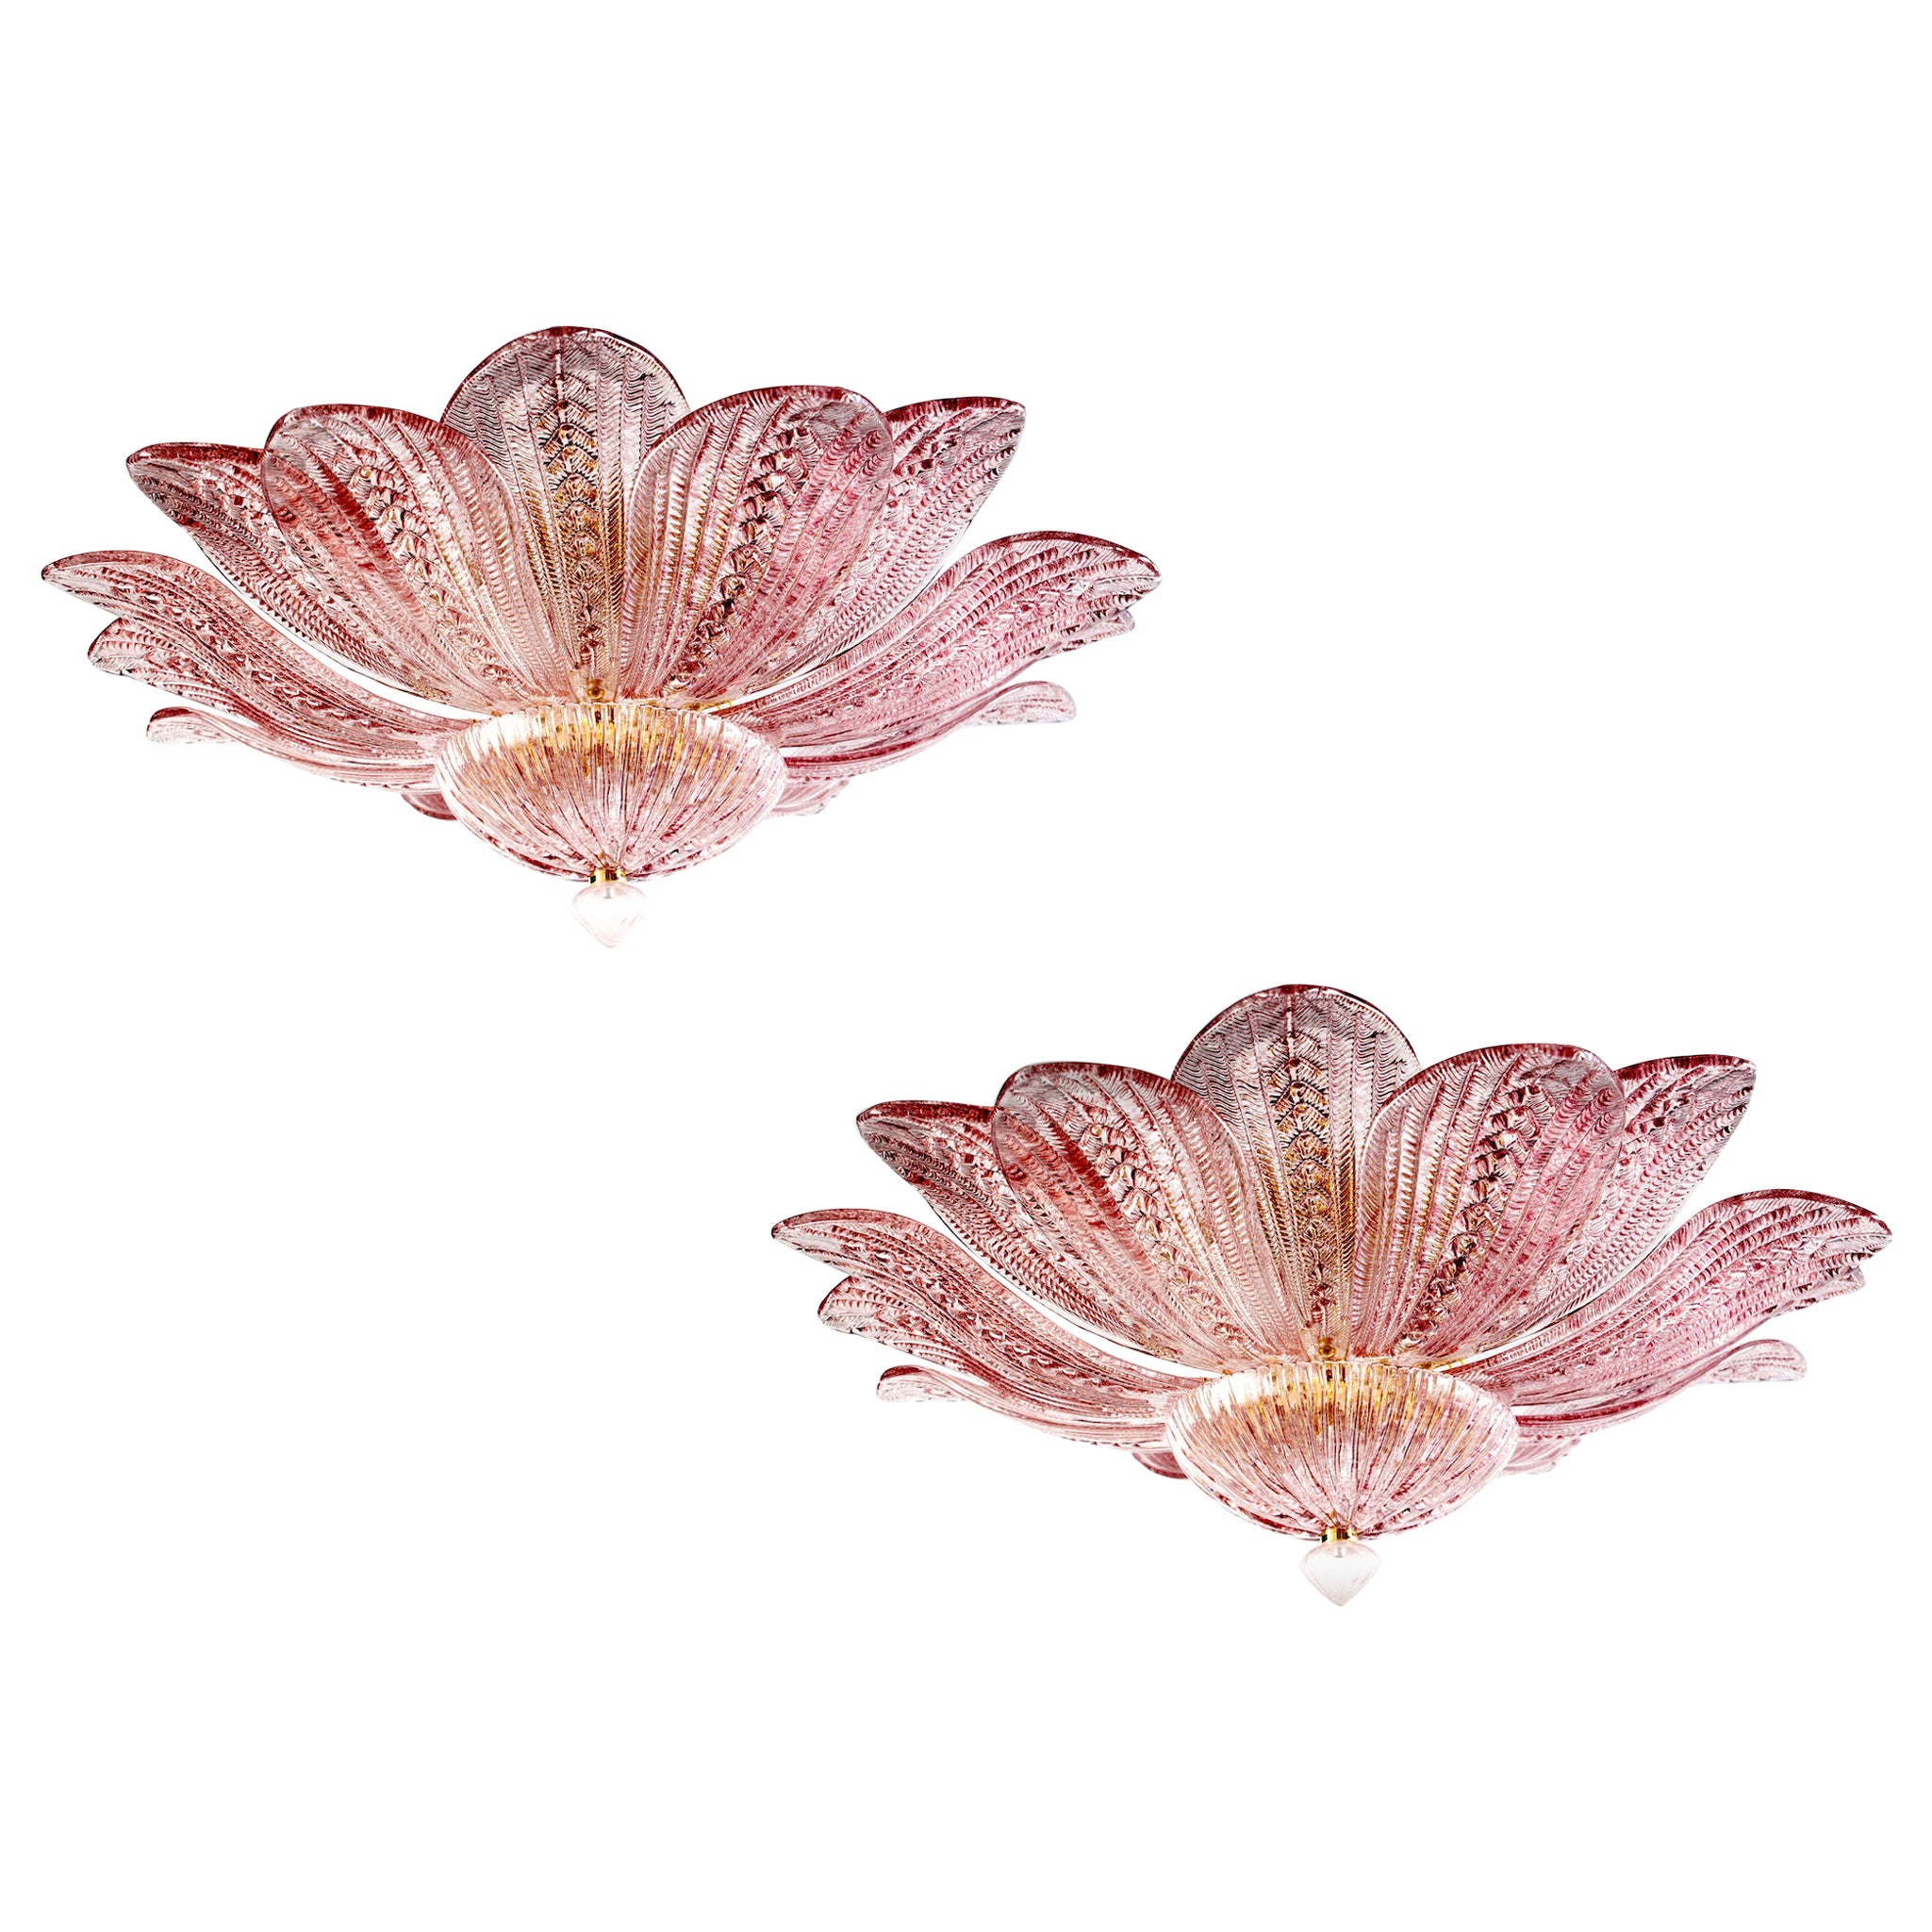 Realized in pure pink amethyst color Murano glass consists of 16 delicious hand blown leaves.
 The structure is gilt-metal. Five E27 lights spread a magical light.
Available 3 items.
This light fixture can be disassembled and the leaves individually